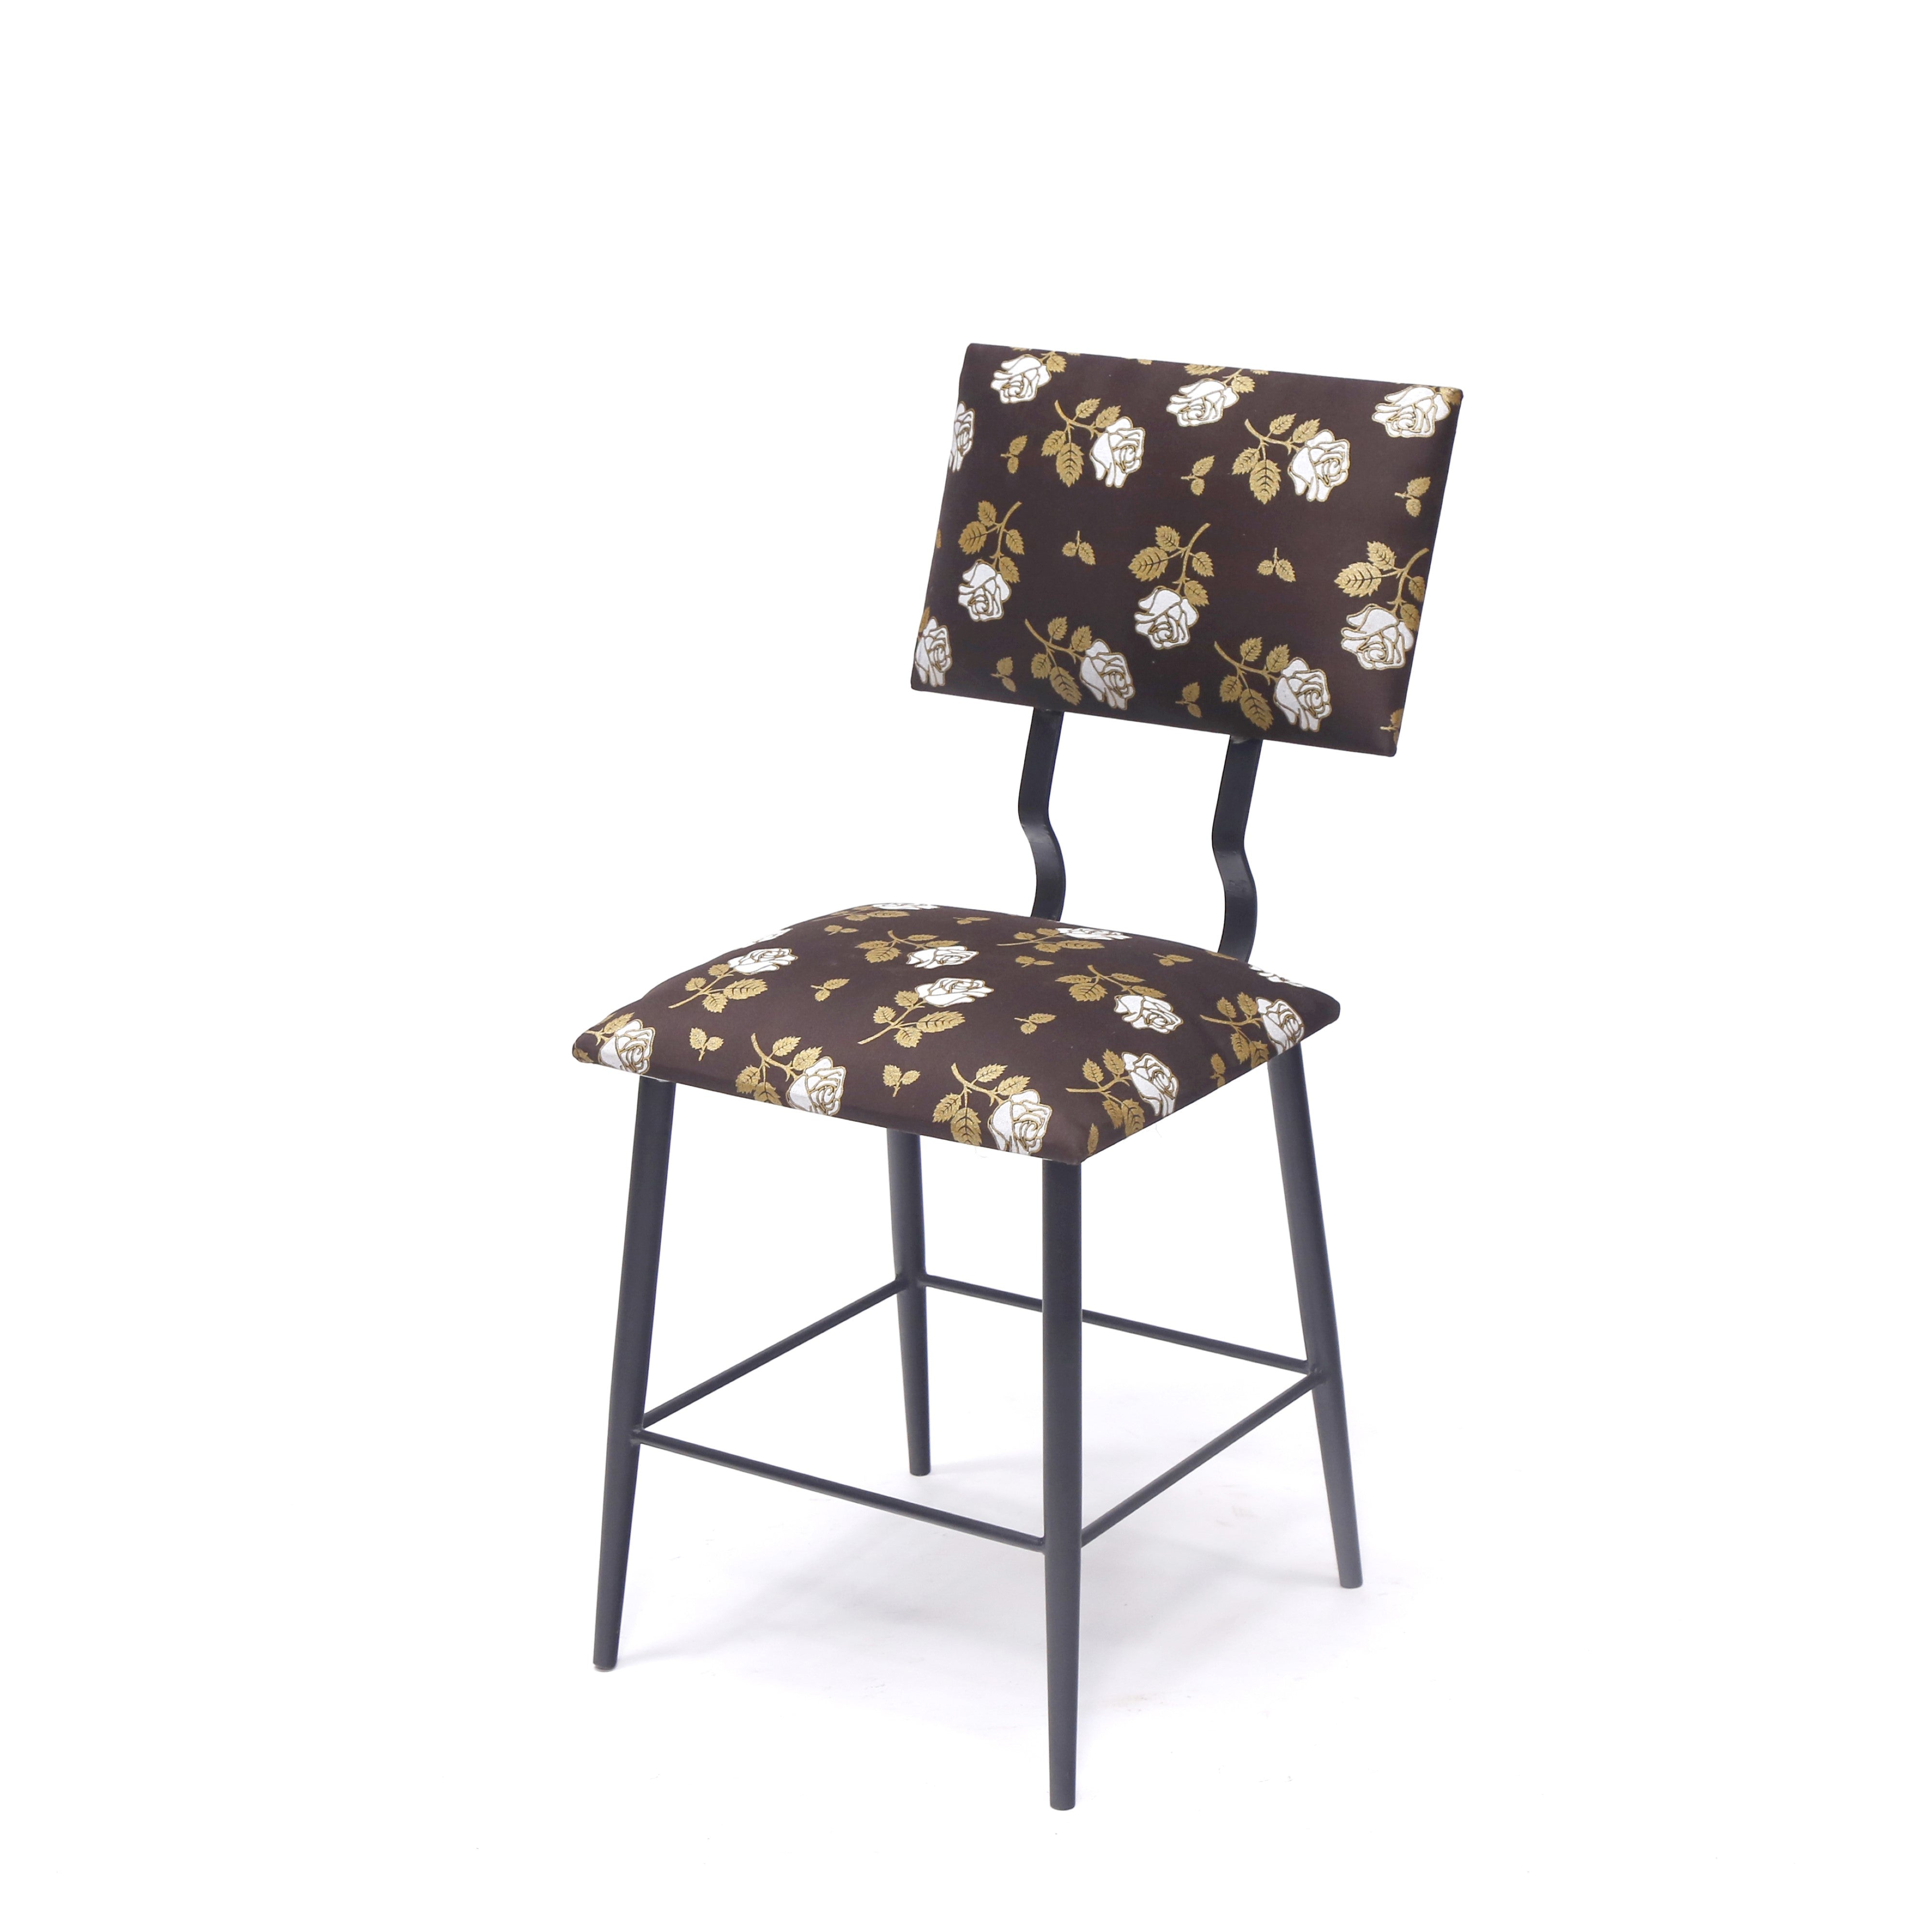 (Set of 2) Metal Upholstery Chair Dining Chair